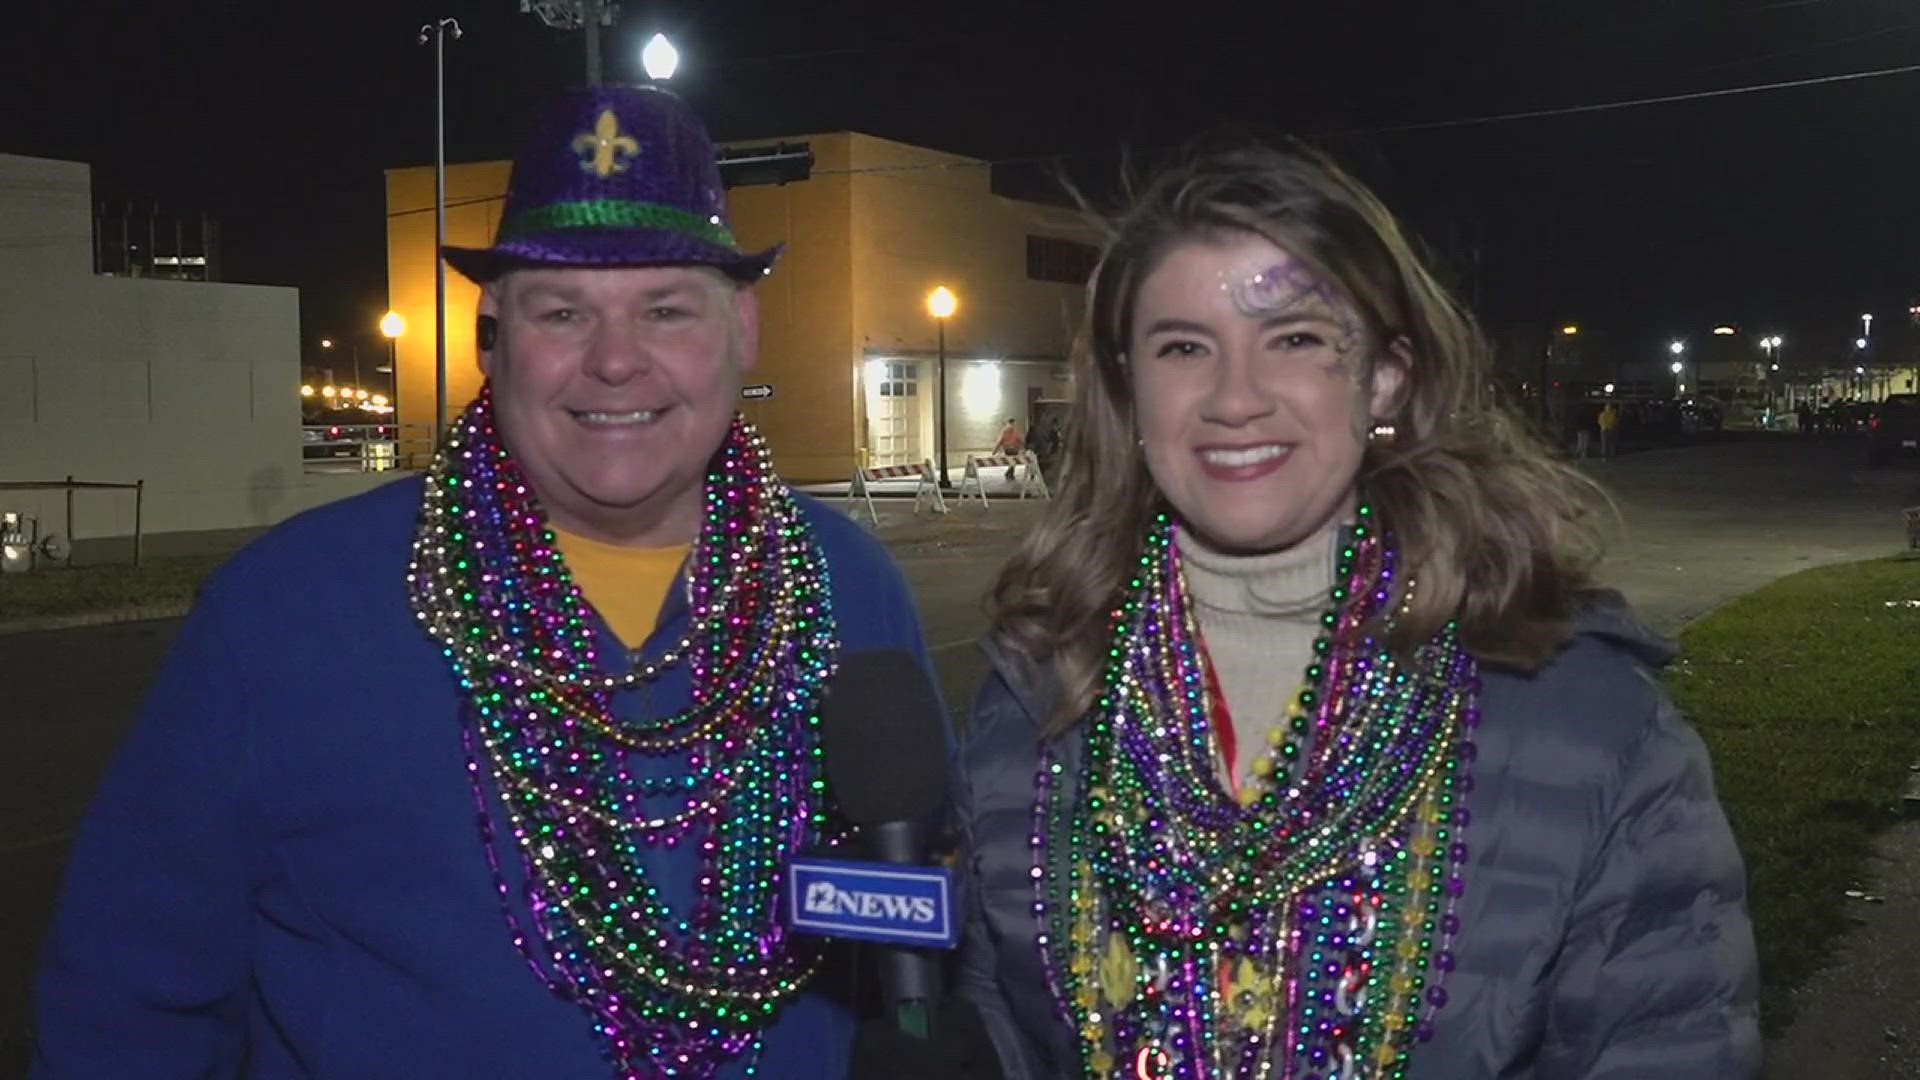 Simona and Jeff agree the night was full of fun and excitement. Well after the parade, plenty of beads were still on the ground.